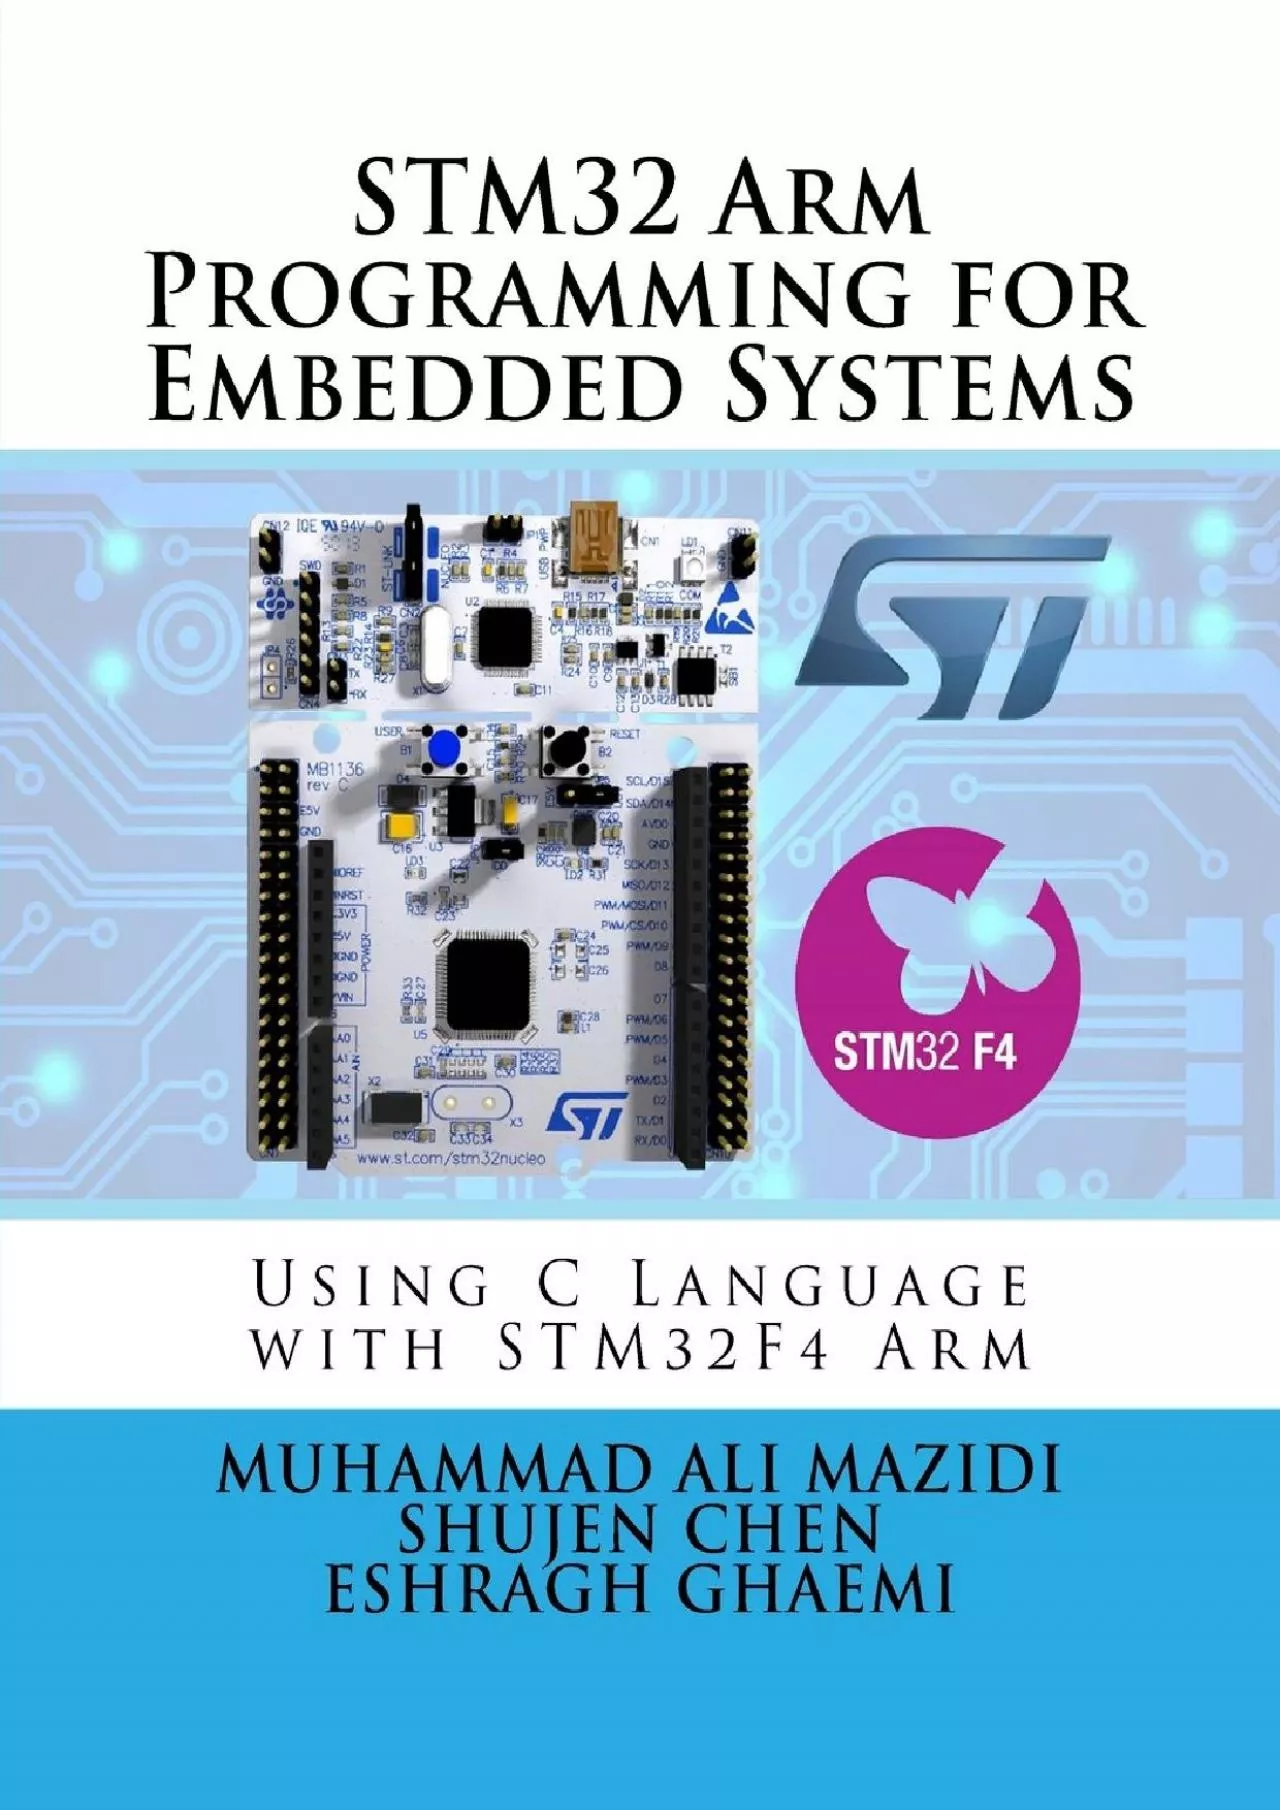 [BEST]-STM32 Arm Programming for Embedded Systems (Mazidi  Naimi ARM)